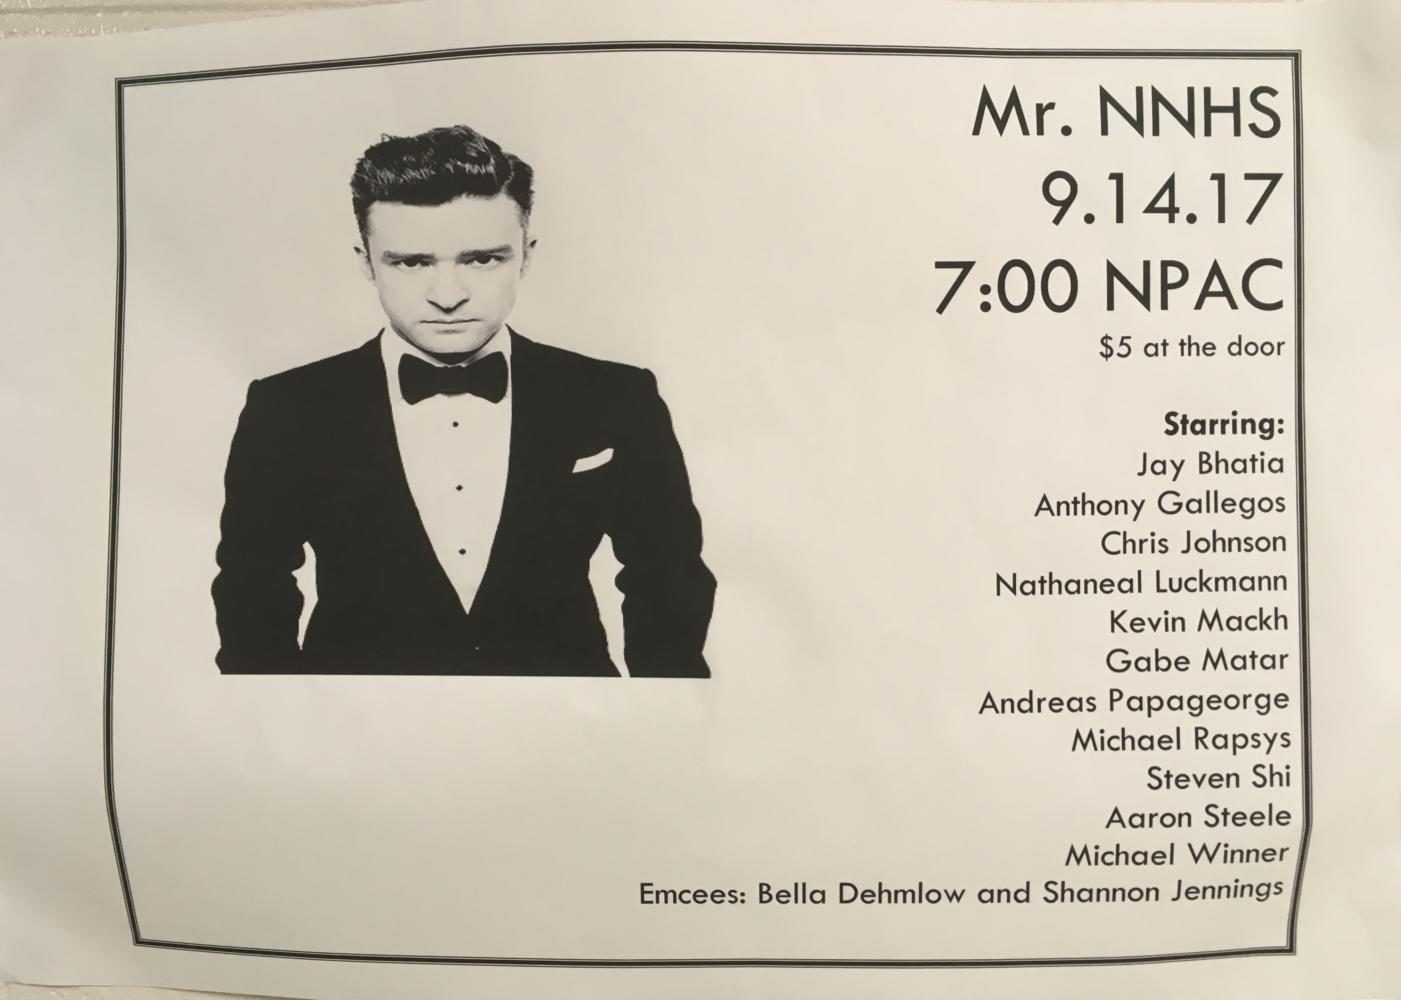 Meet the contestants of Mr. NNHS 2017